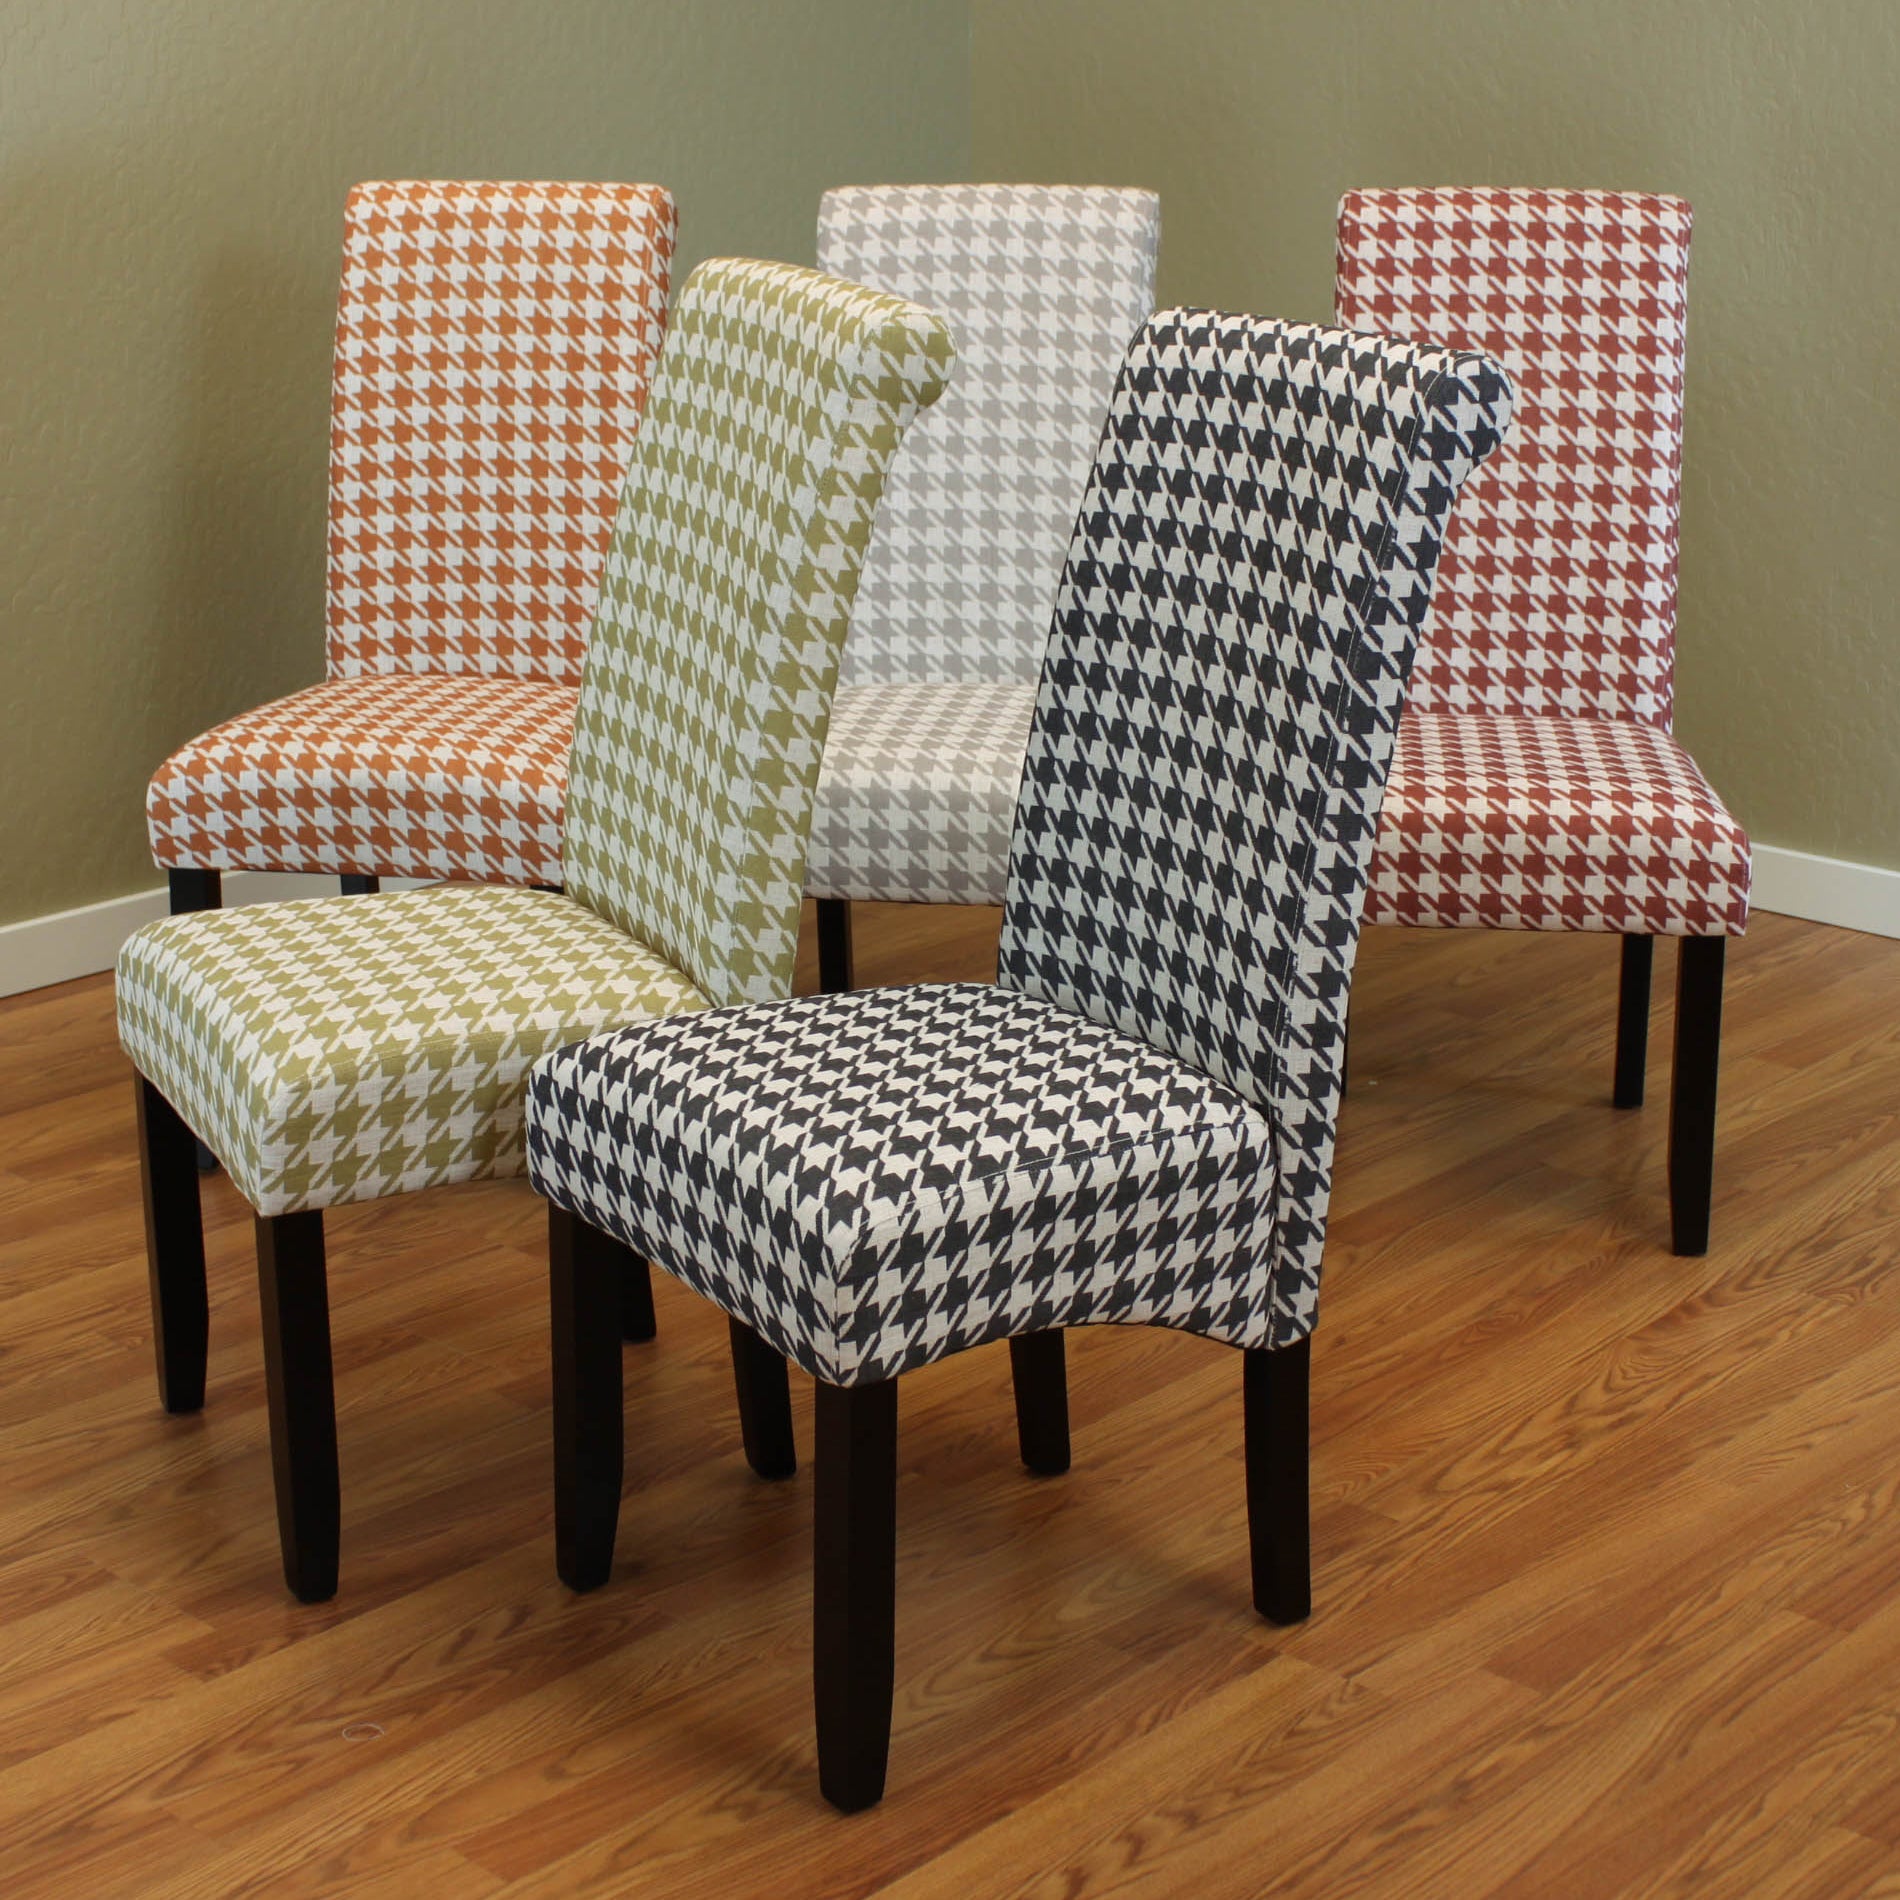 Milan Houndstooth Linen Dining Chairs (Set of 2)